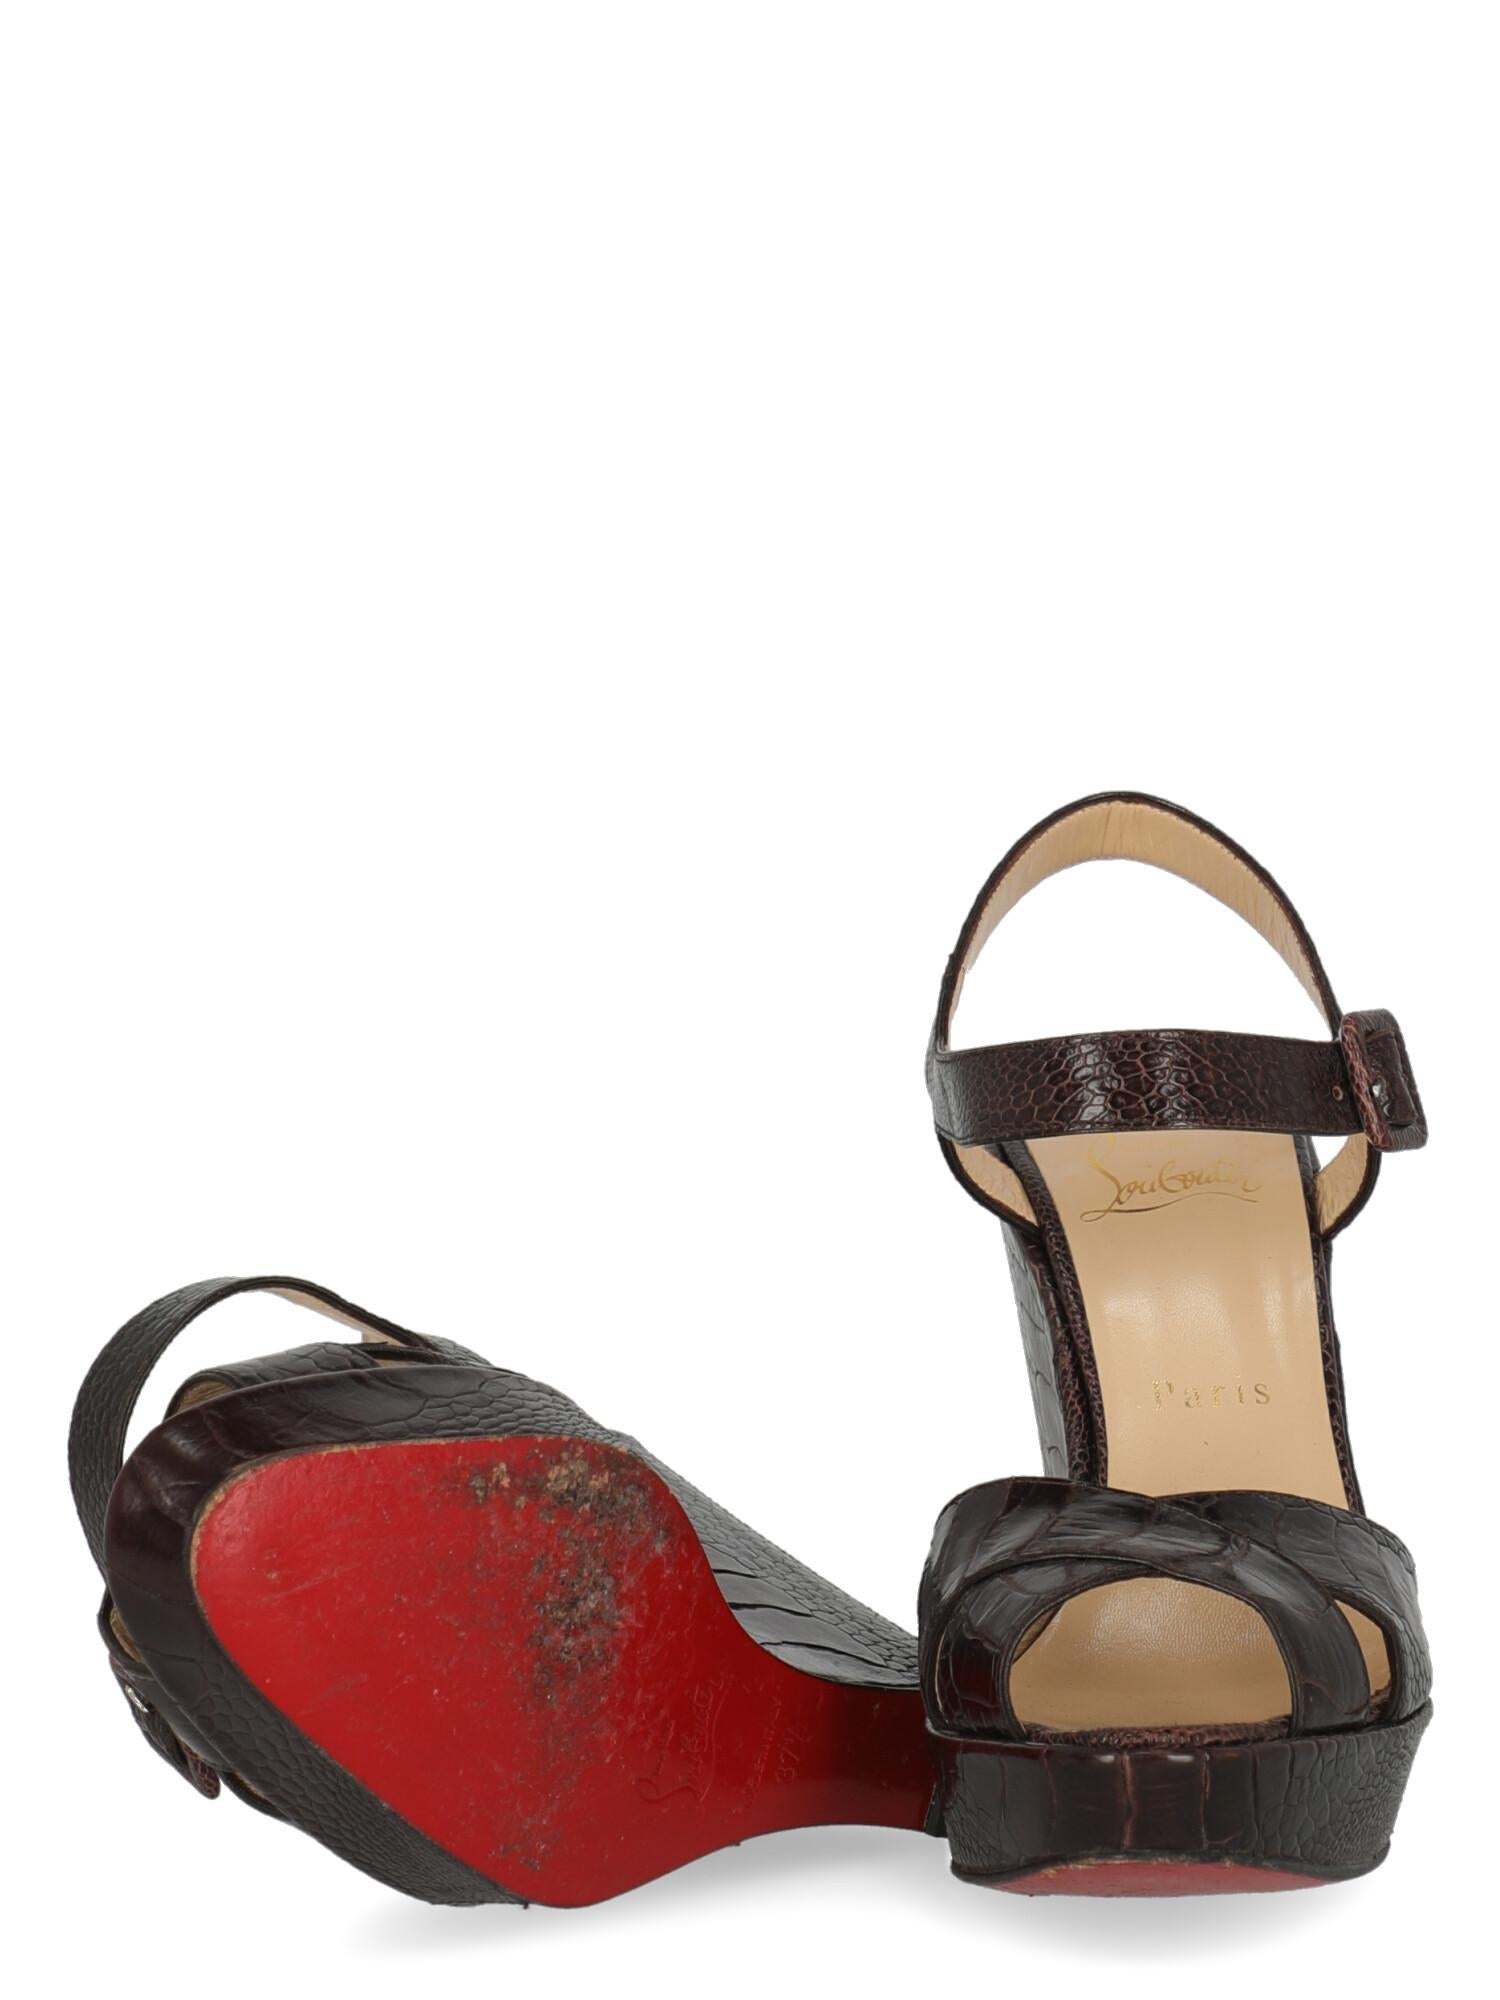 Christian Louboutin Women Sandals Brown Leather EU 37.5 In Good Condition For Sale In Milan, IT